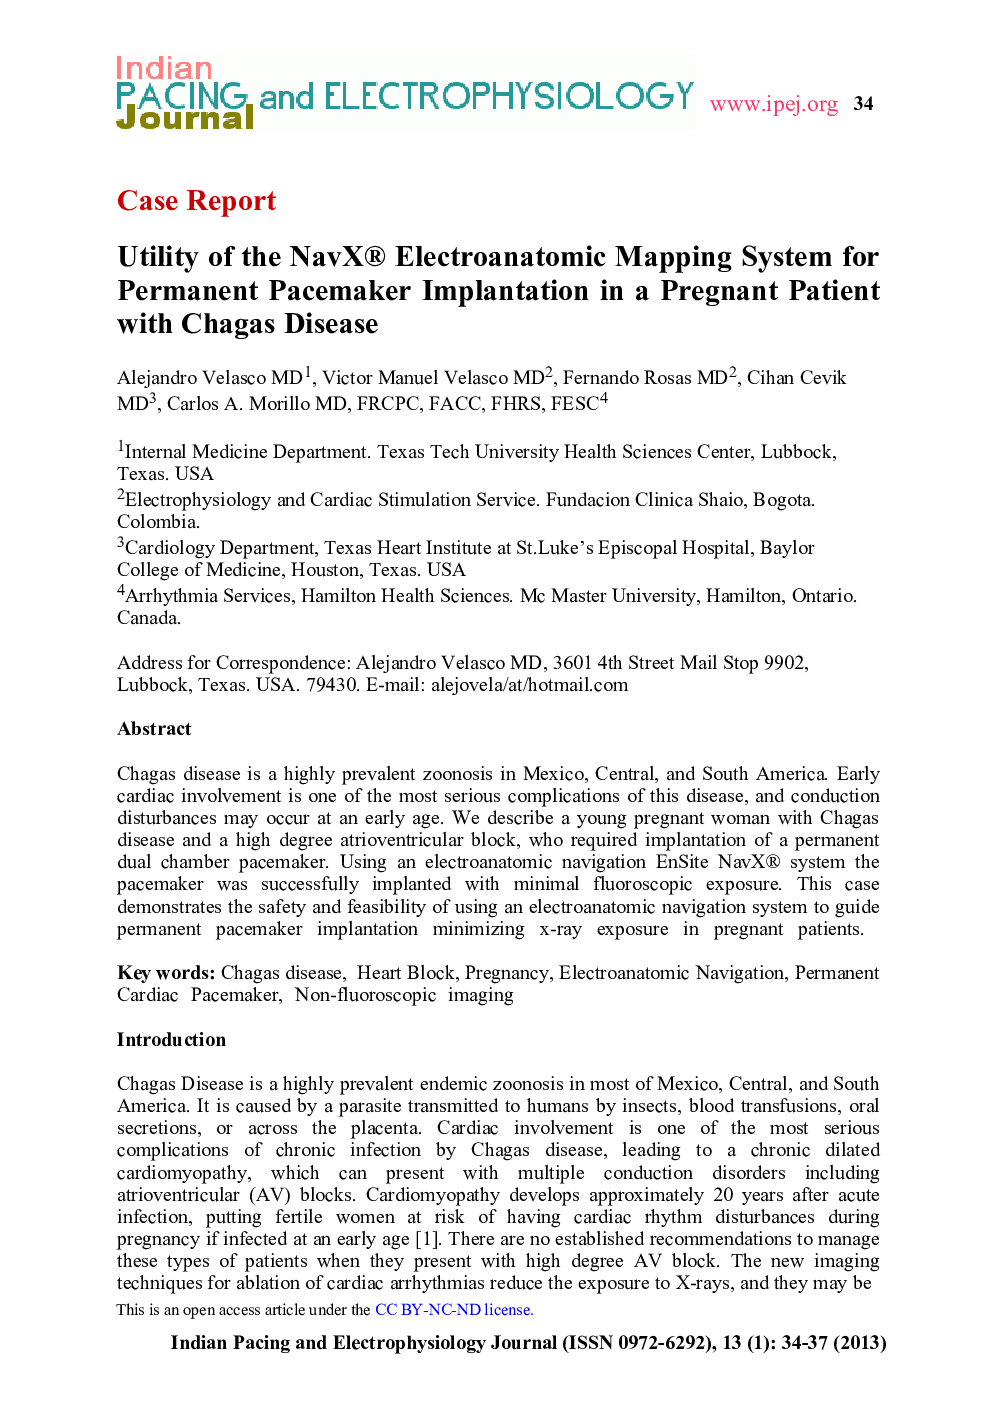 Utility of the NavX® Electroanatomic Mapping System for Permanent Pacemaker Implantation in a Pregnant Patient with Chagas Disease